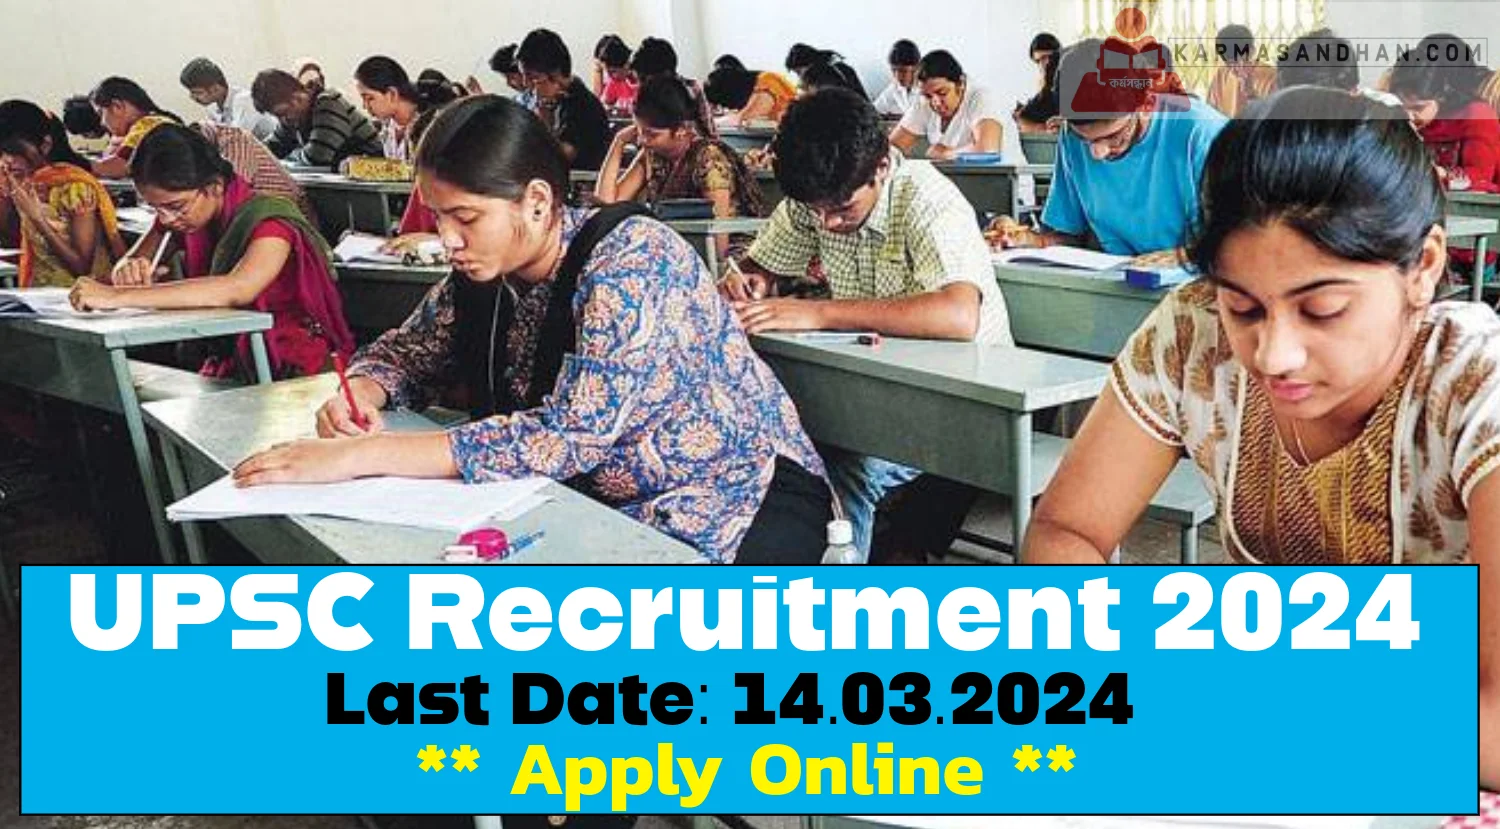 UPSC Recruitment 2024 for 76 Assistant Director & Other Post